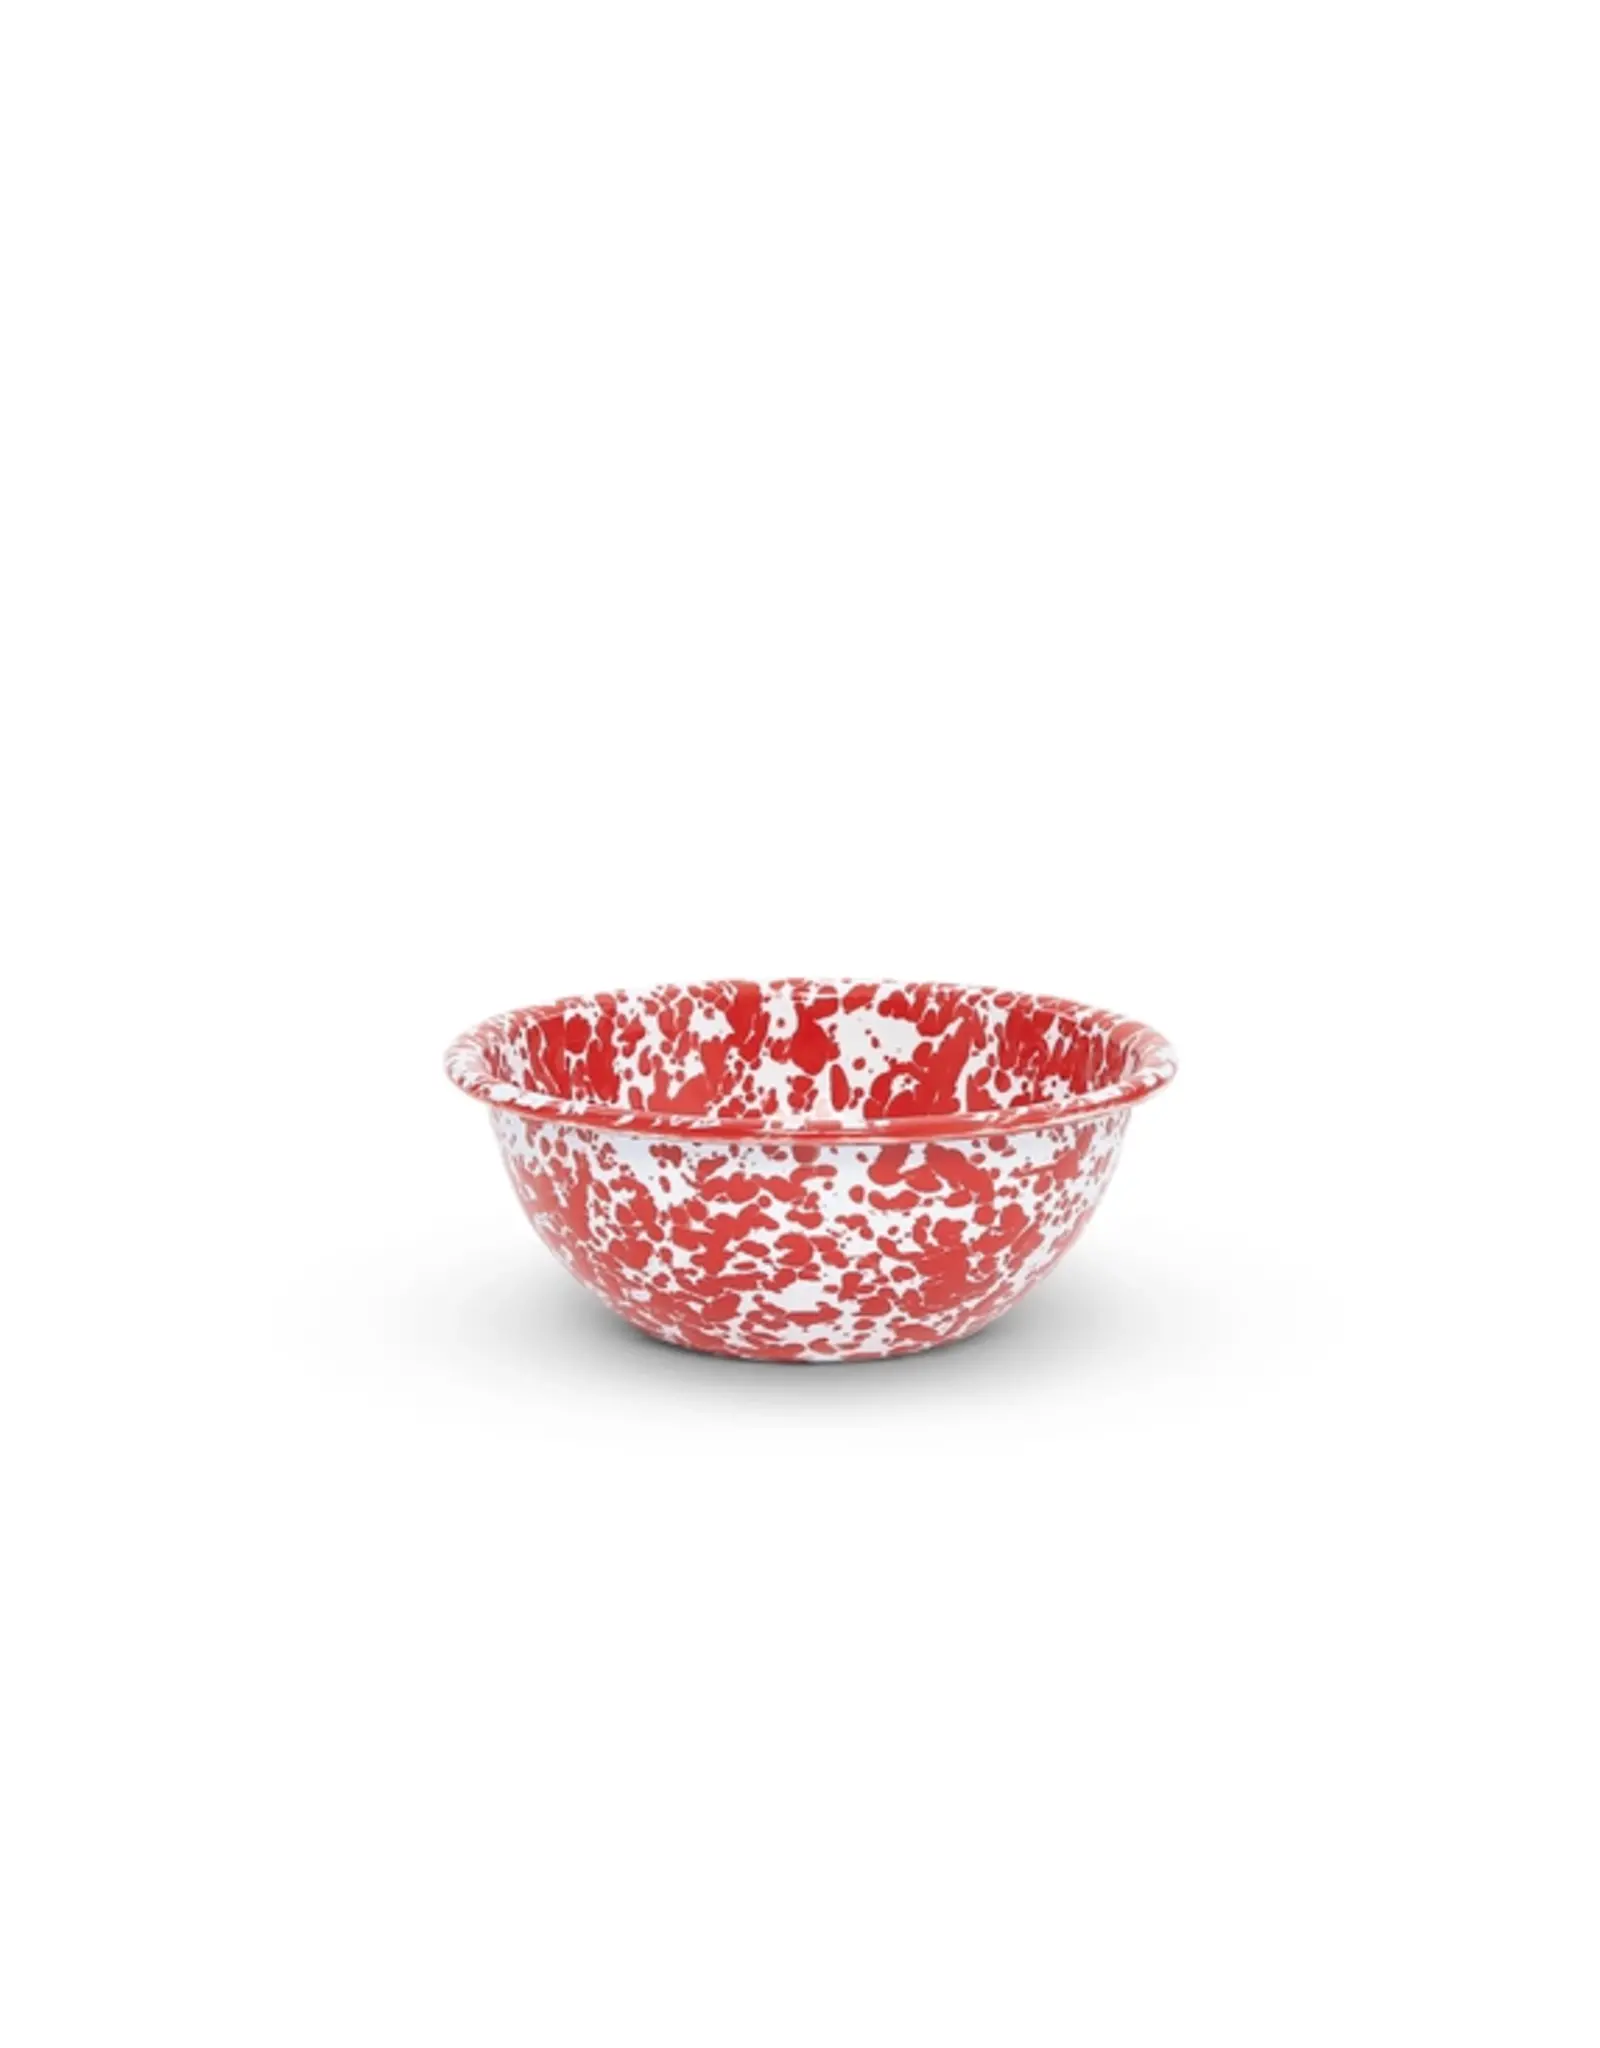 Crow Canyon Cereal Bowl -